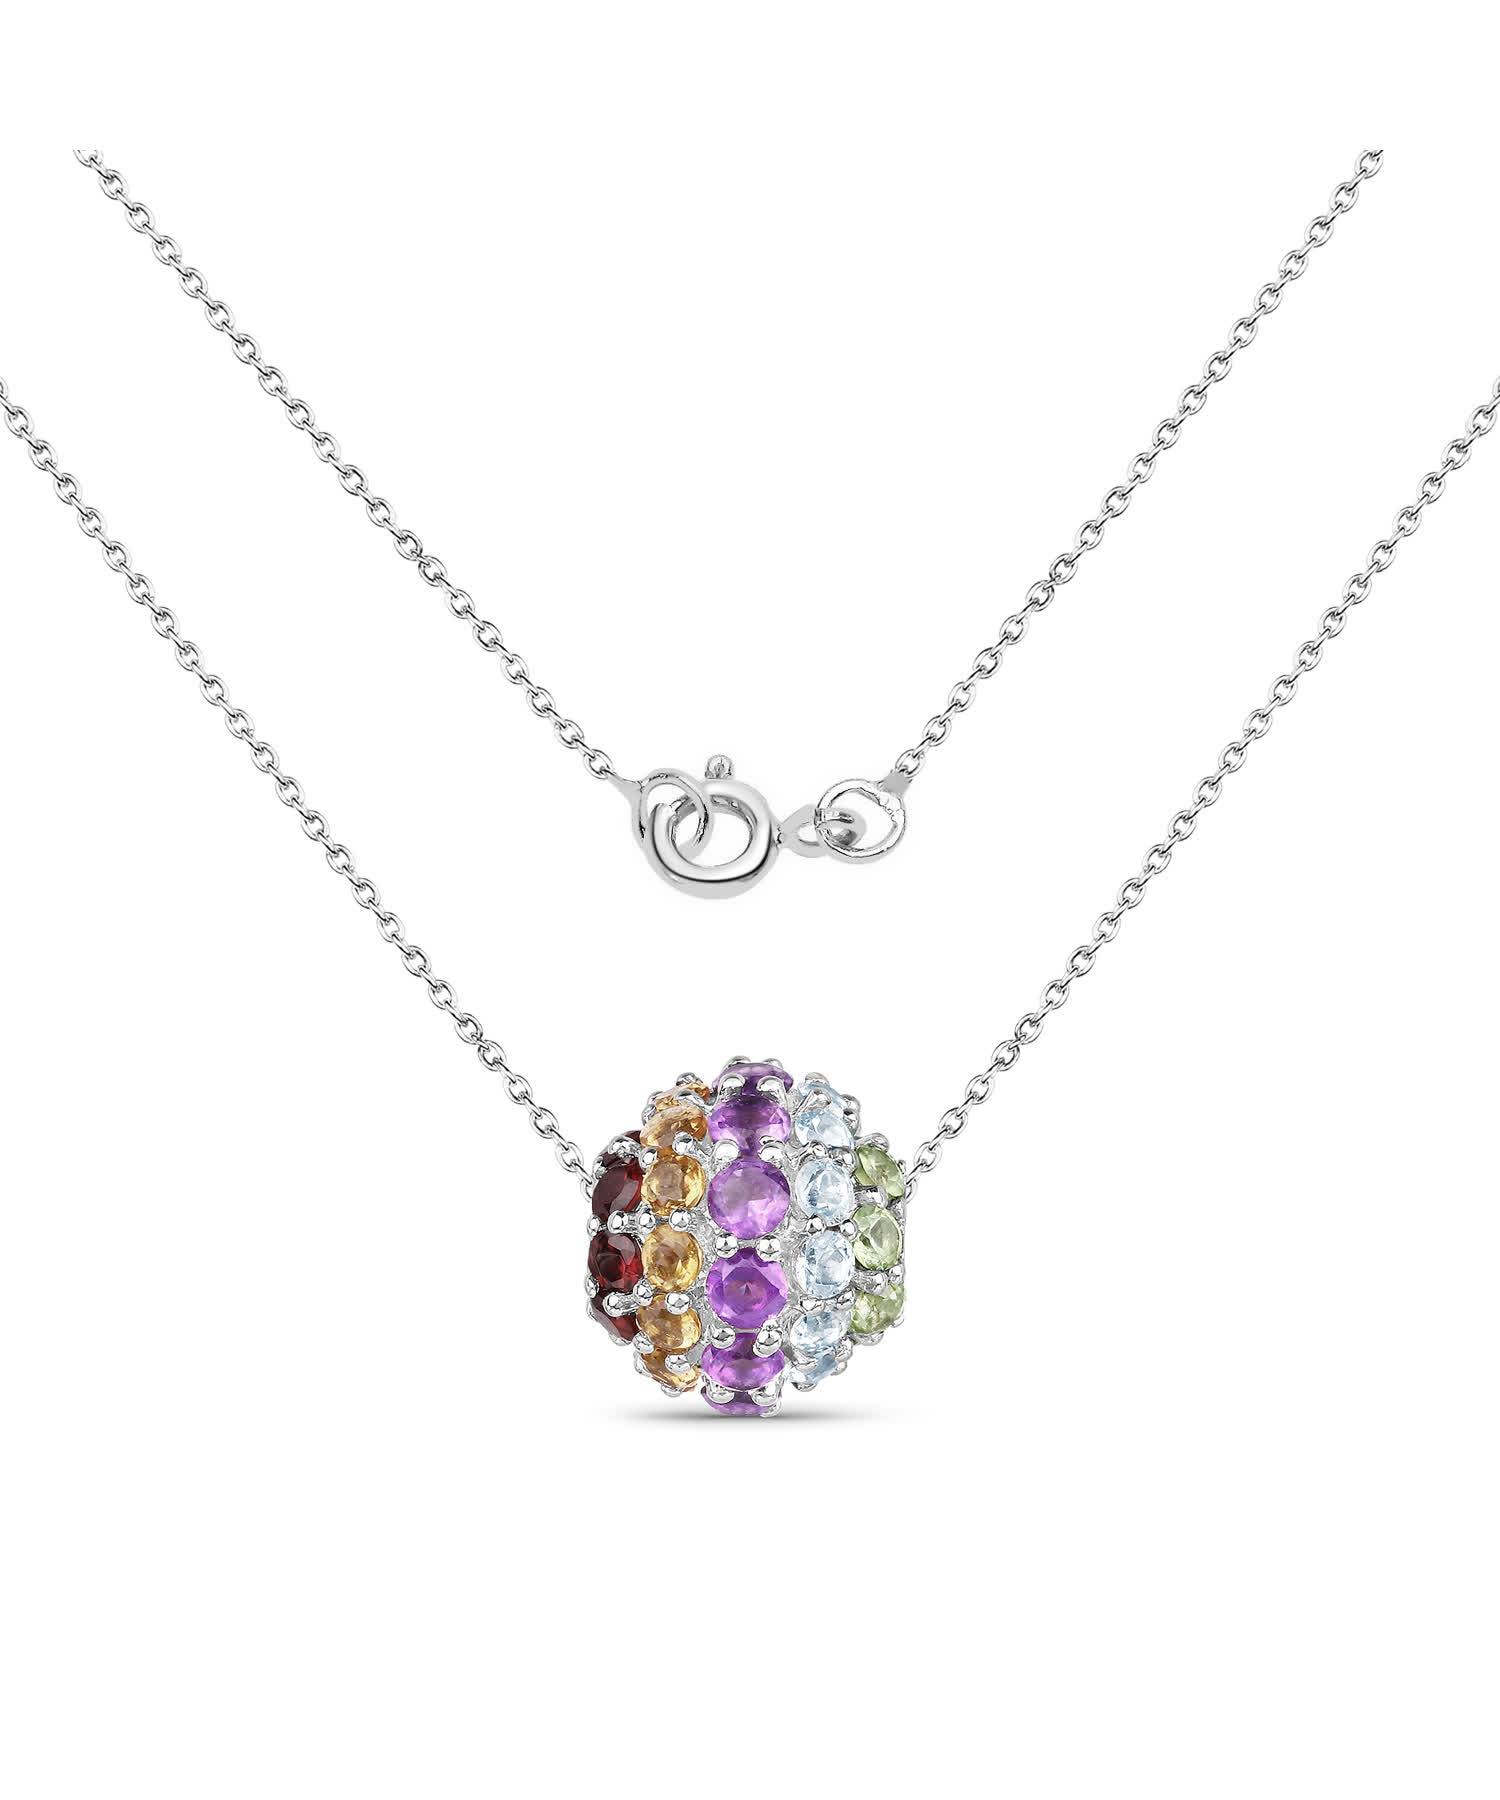 3.95ctw Natural Multi-Color Mixed Gems Rhodium Plated 925 Sterling Silver Pendant With Chain View 2